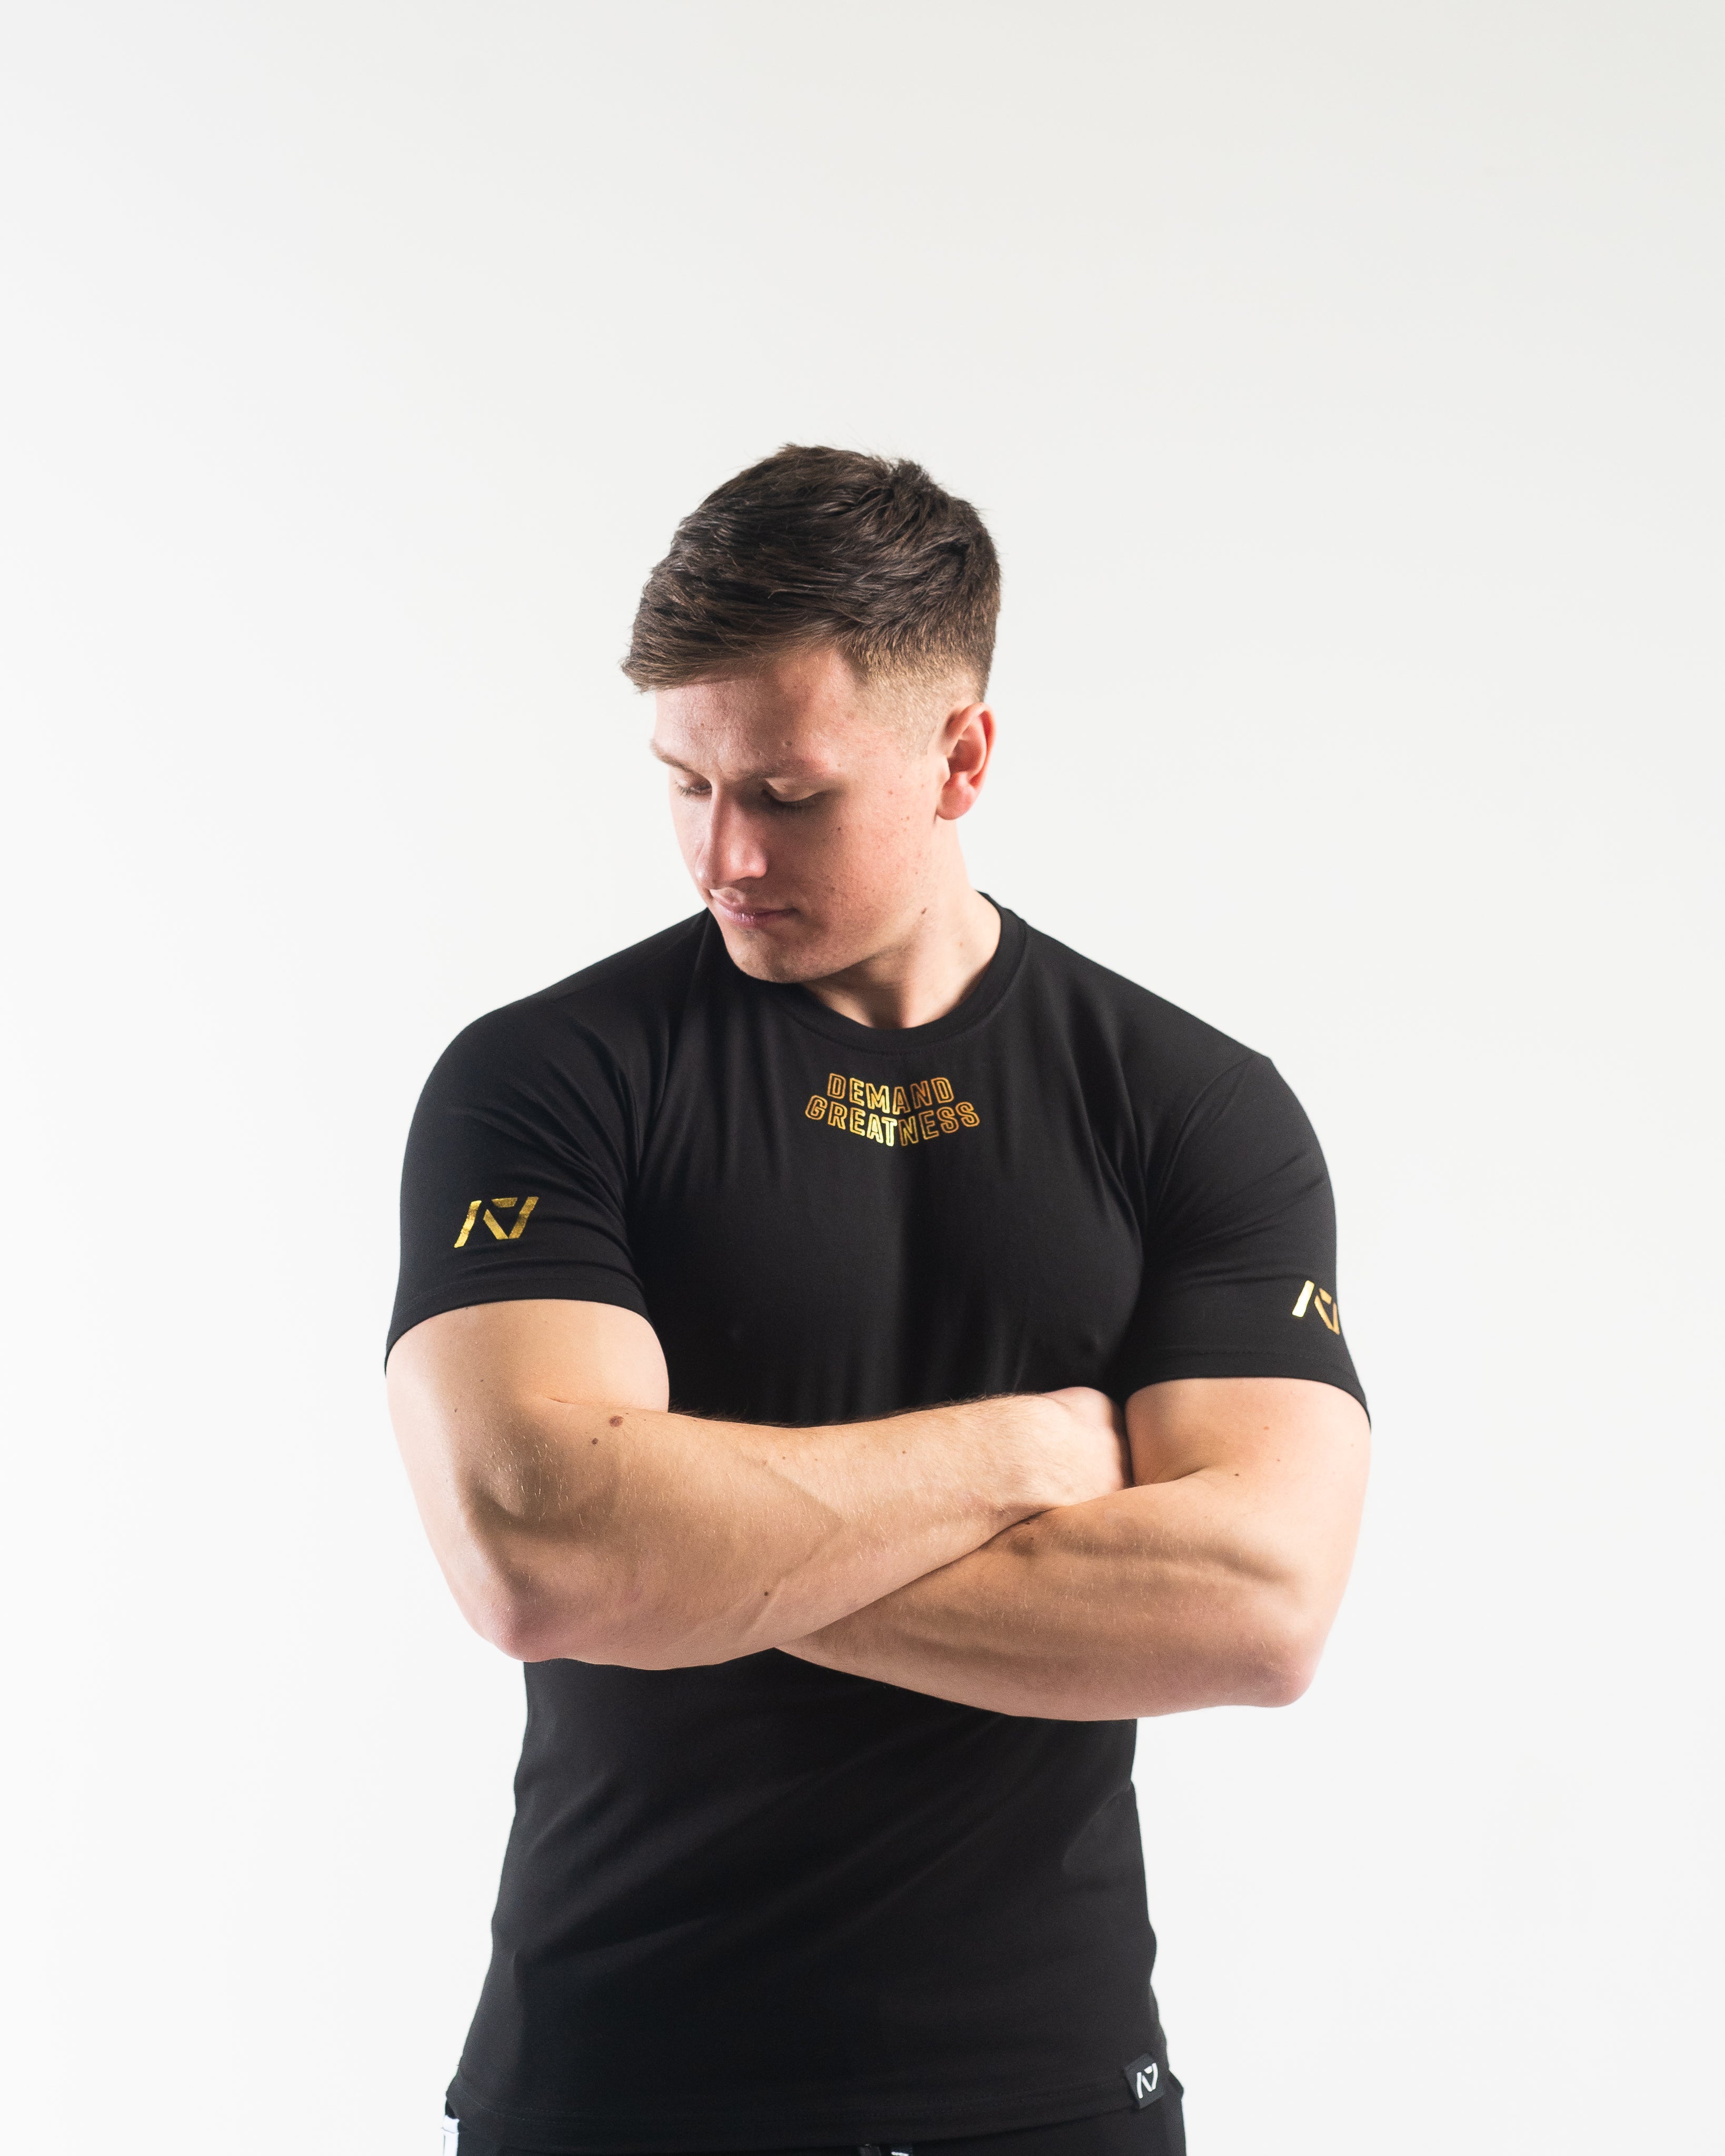 DG23 Gold Standard is our new meet shirt design highlighting Demand Greatness with a double outline font to showcase your impact on the platform. The DG23 Meet Shirt is IPF Approved. Shop the full A7 Powerlifting IPF Approved Equipment collection. The IPF Approved Kit includes Powerlifting Singlet, A7 Meet Shirt, A7 Zebra Wrist Wraps, A7 Deadlift Socks, Hourglass Knee Sleeves (Stiff Knee Sleeves and Rigor Mortis Knee Sleeves). All A7 Powerlifting Equipment shipping to UK, Norway, Switzerland and Iceland. 